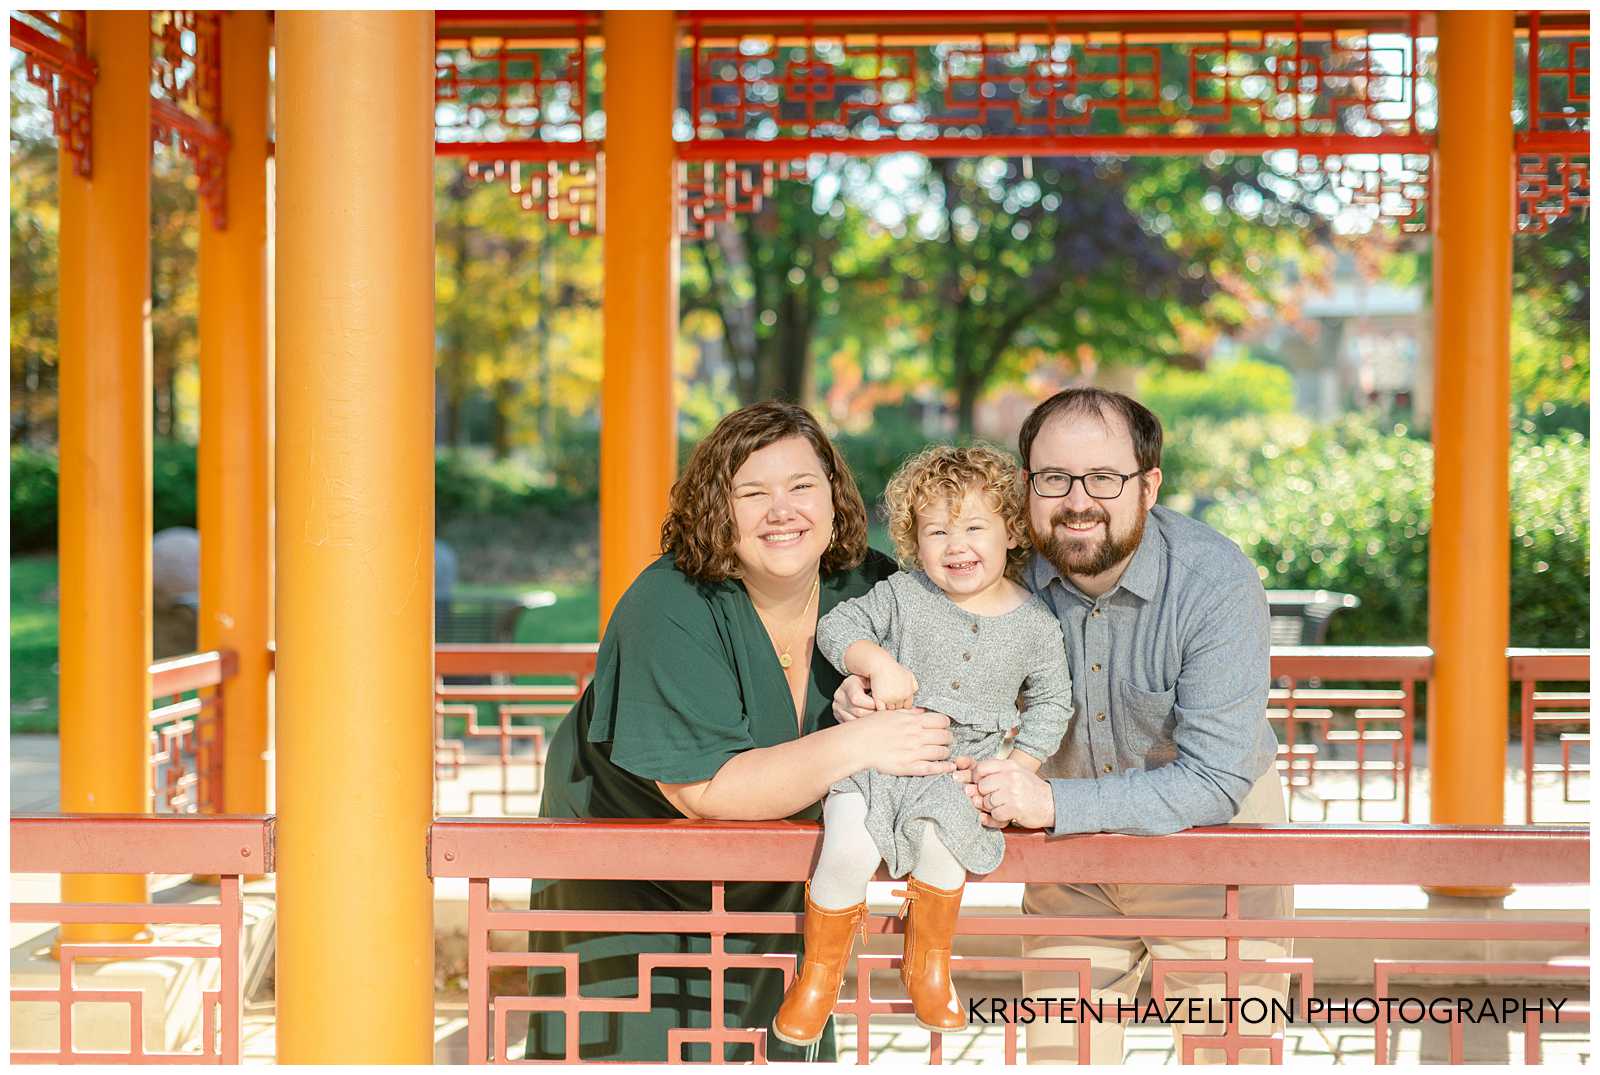 Fall family photos at a pavilion in Chicago's chinatown district